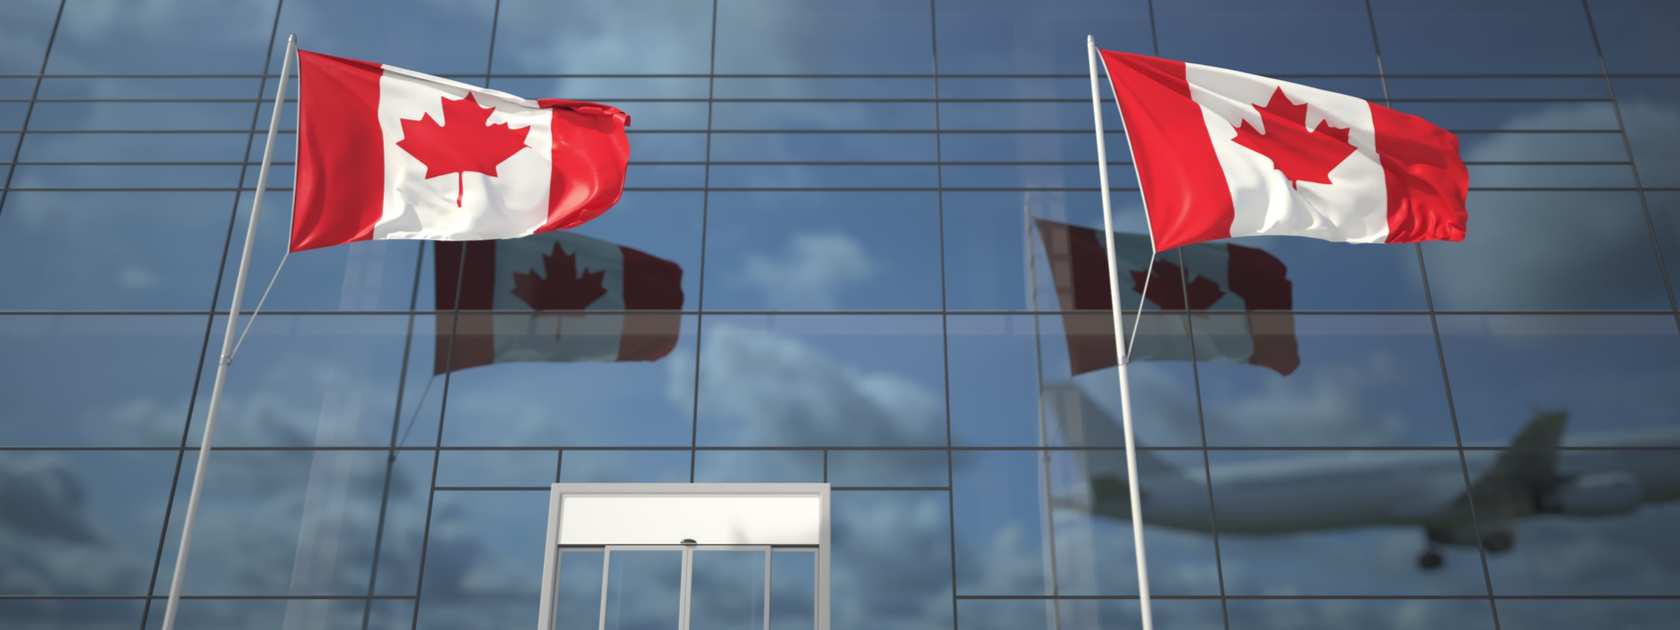 Two Canadian flags in front of the terminal building.